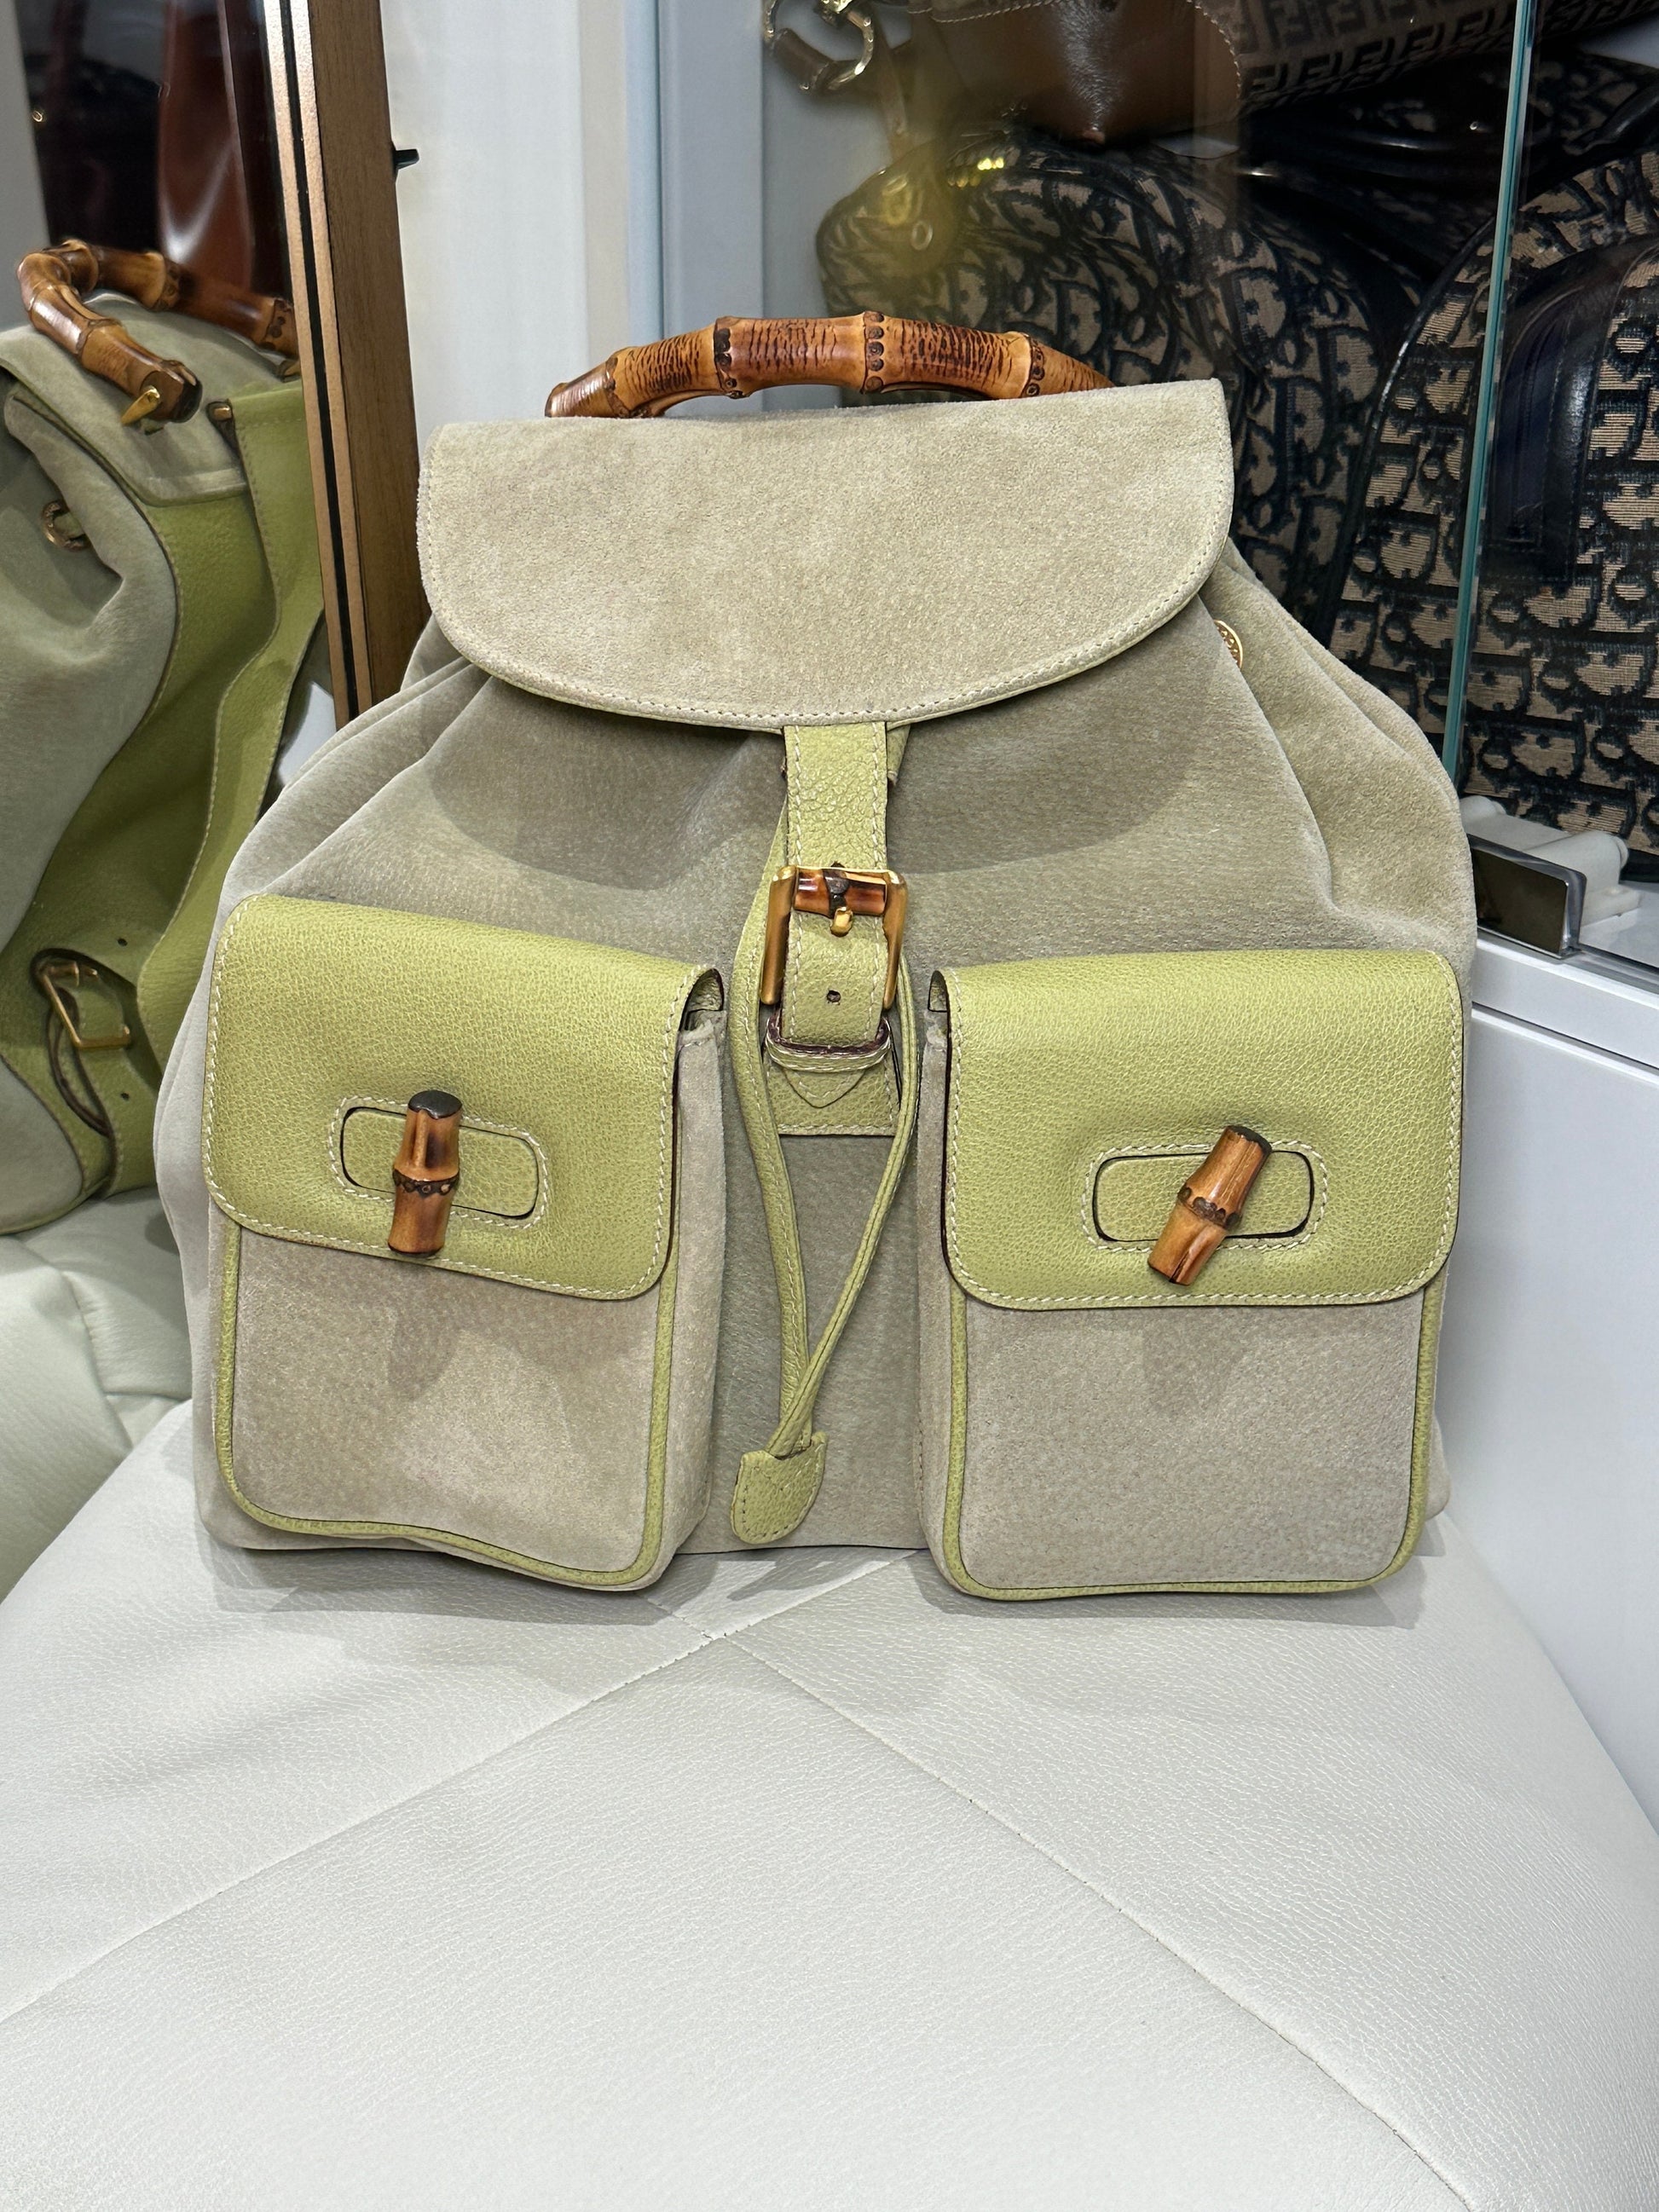 GUCCI VINTAGE 100% Authentic Genuine Suede Iconic Bamboo Handle Backpack, Light Sage Green, 2000's, Good Condition